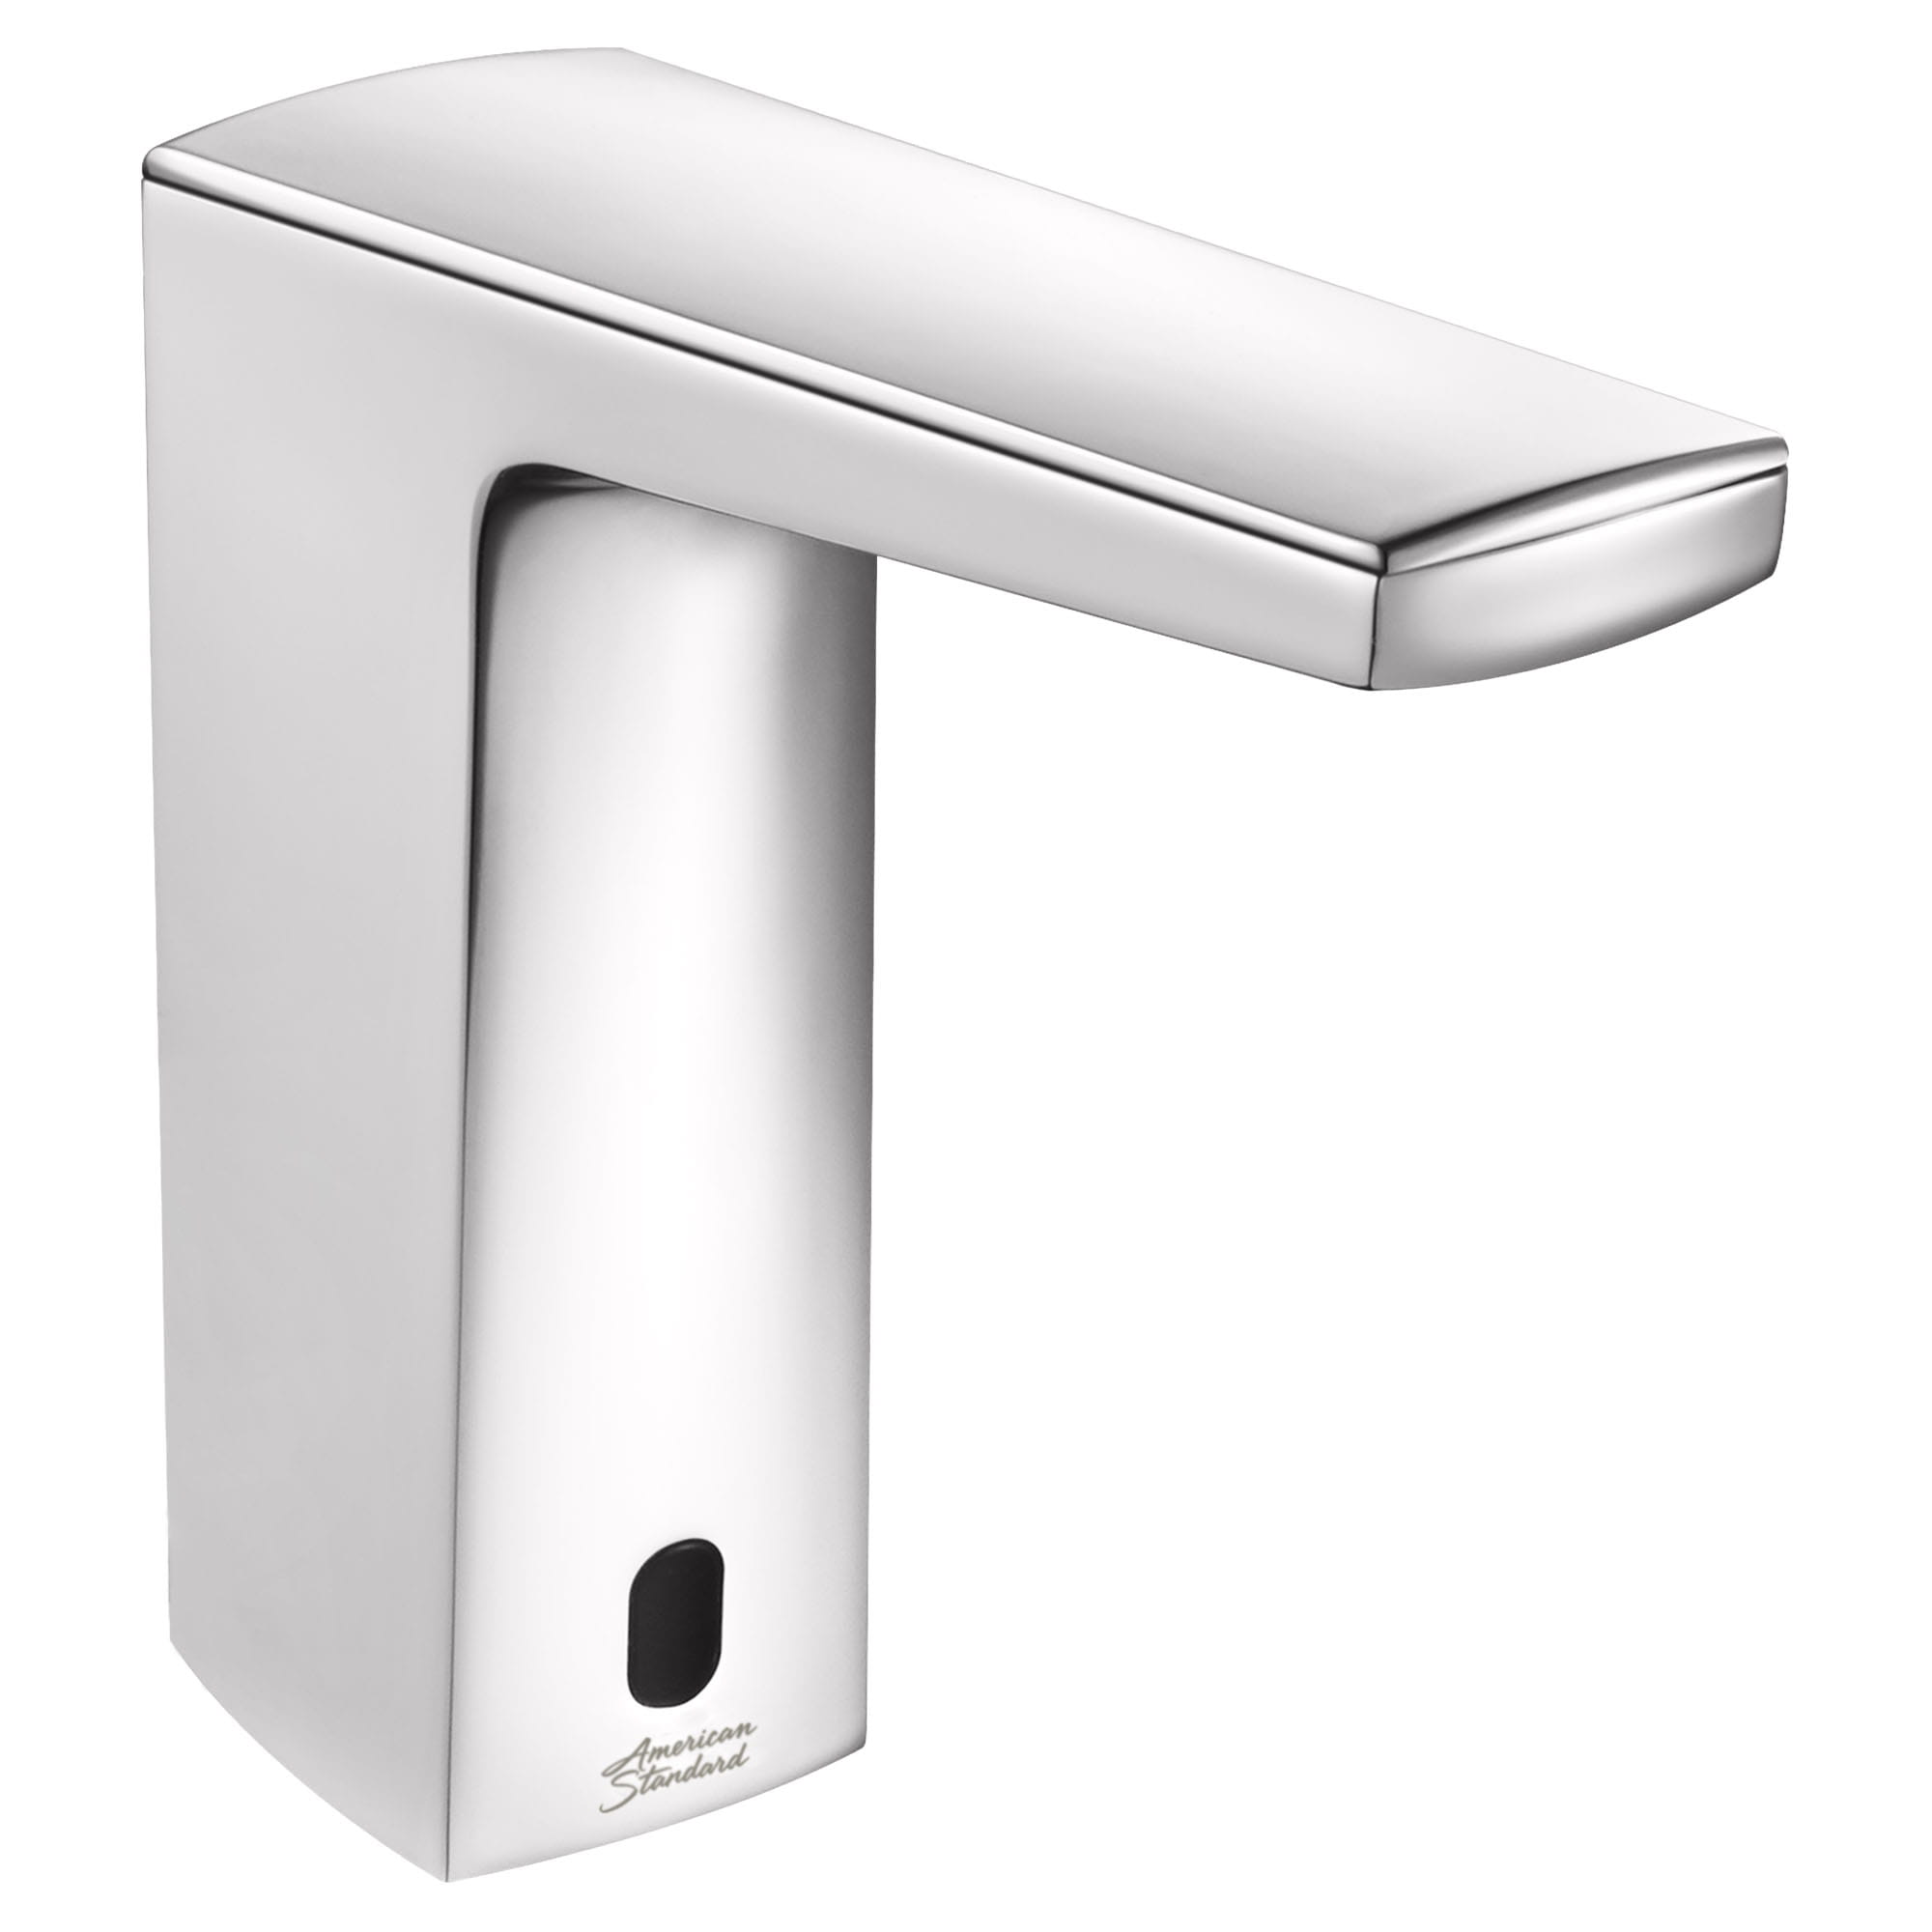 Paradigm Selectronic Touchless Faucet Battery Powered 05 gpm 19 Lpm CHROME